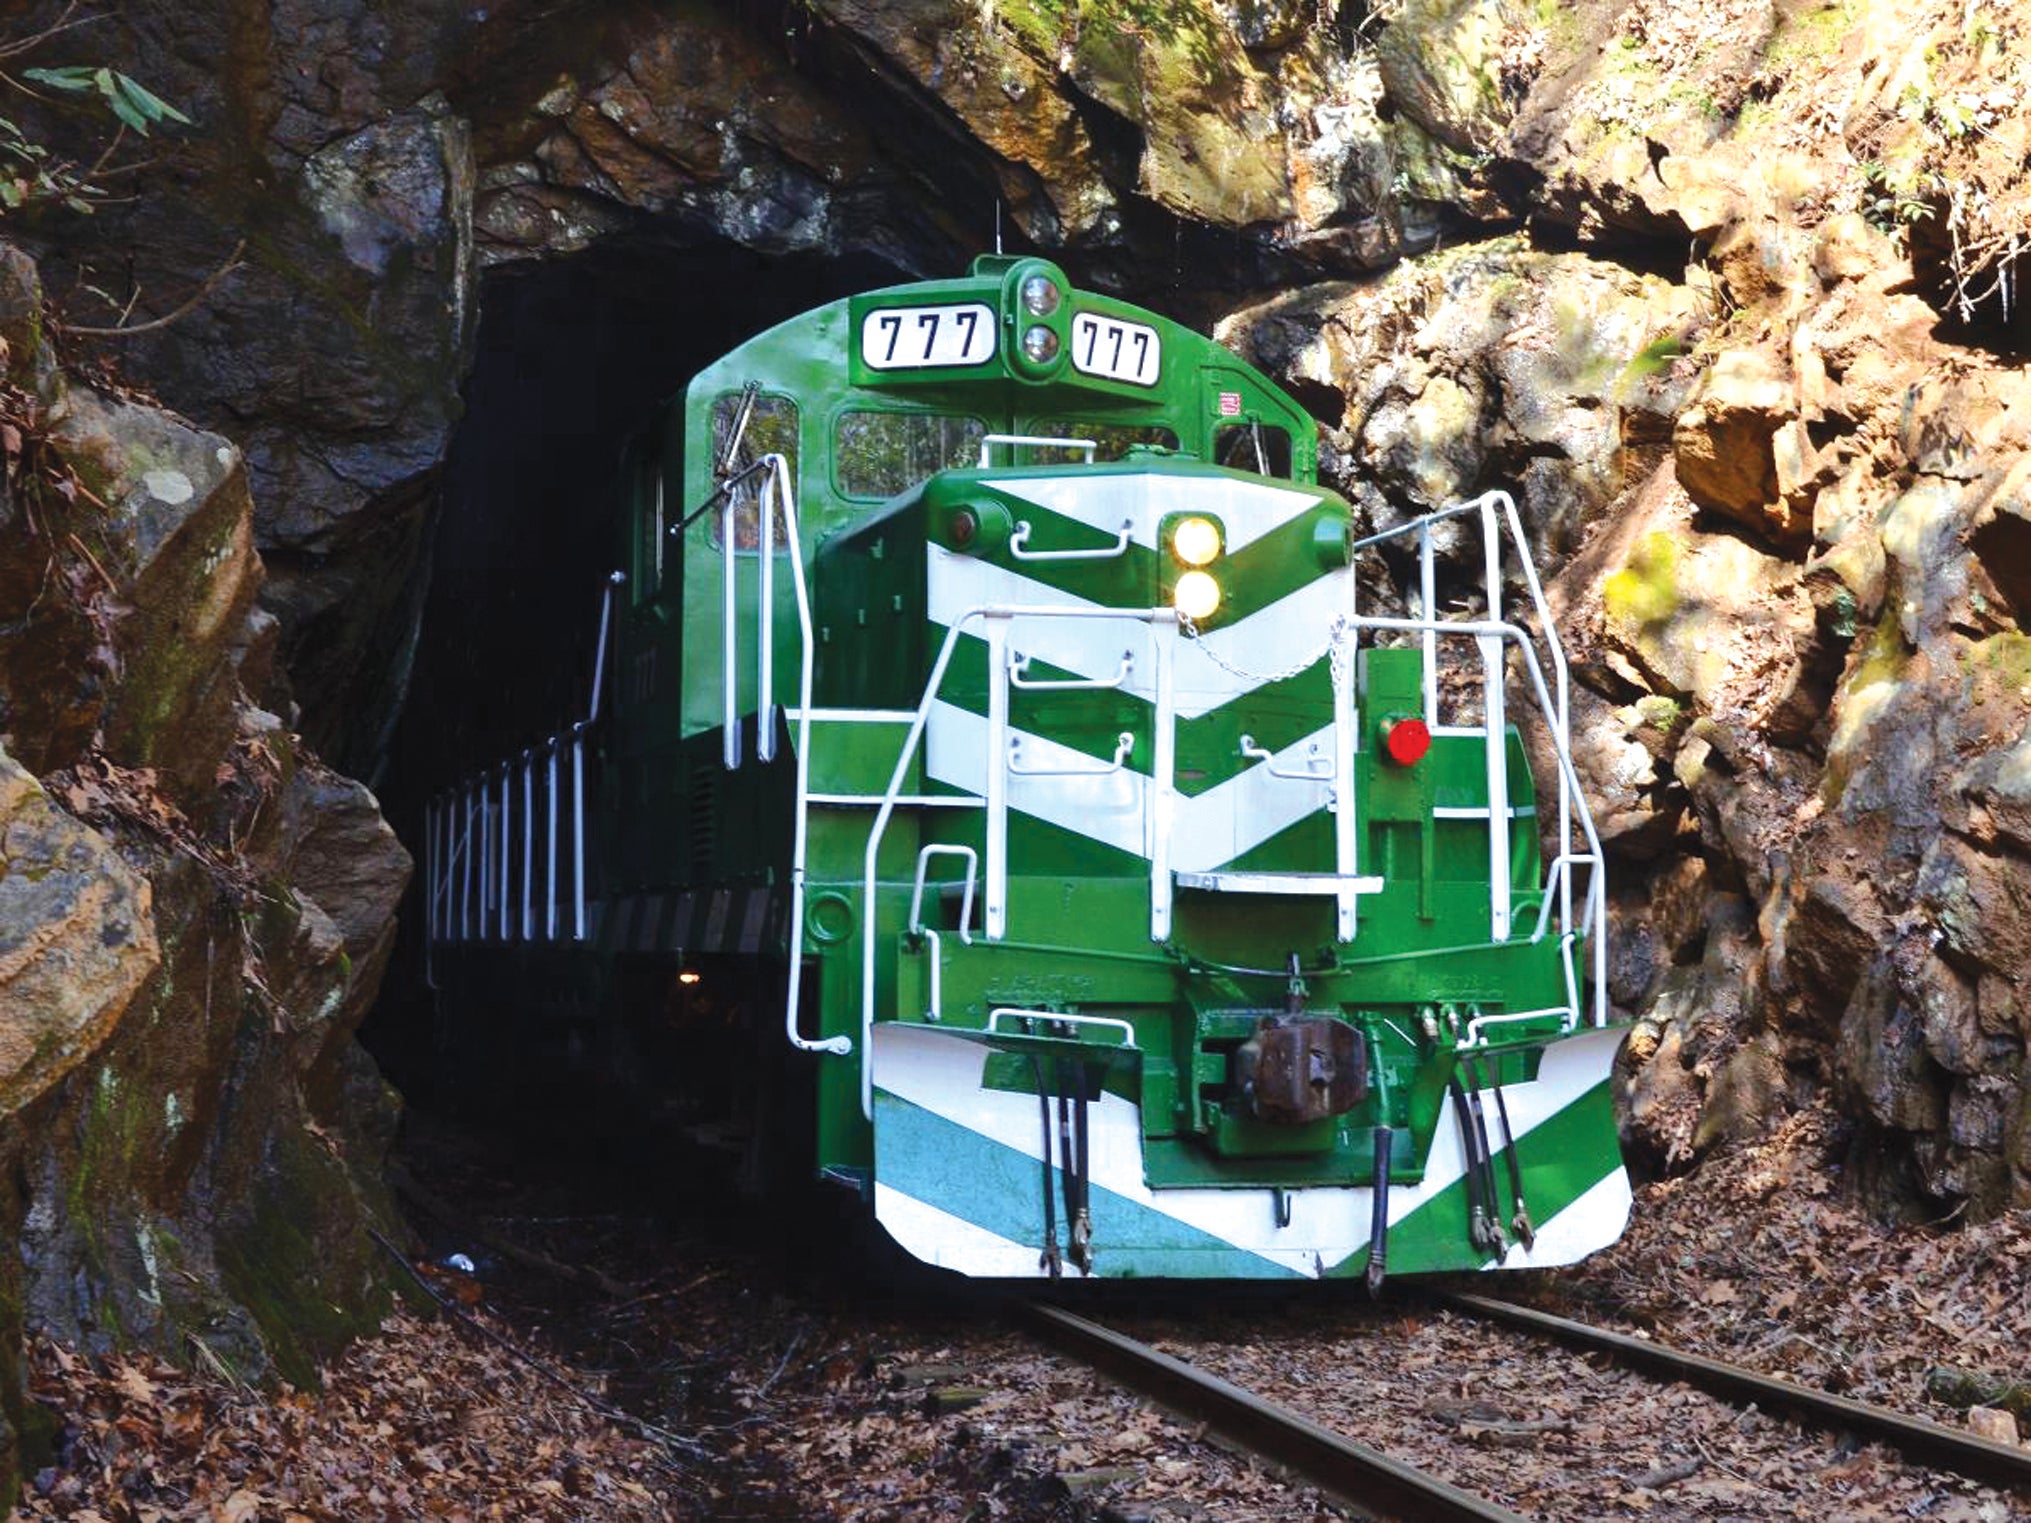 The Watauga Valley Railroad Museum will once again offer its spring excursion through the beautiful Smoky Mountains on May 16. The train will depart Bryson City, N/C, and travel through the mountains and countryside of western North Carolina to Nantahala Gorge. The one-day trip will cover a lot of the operating trackage of the Great Smoky Mountains Railway.